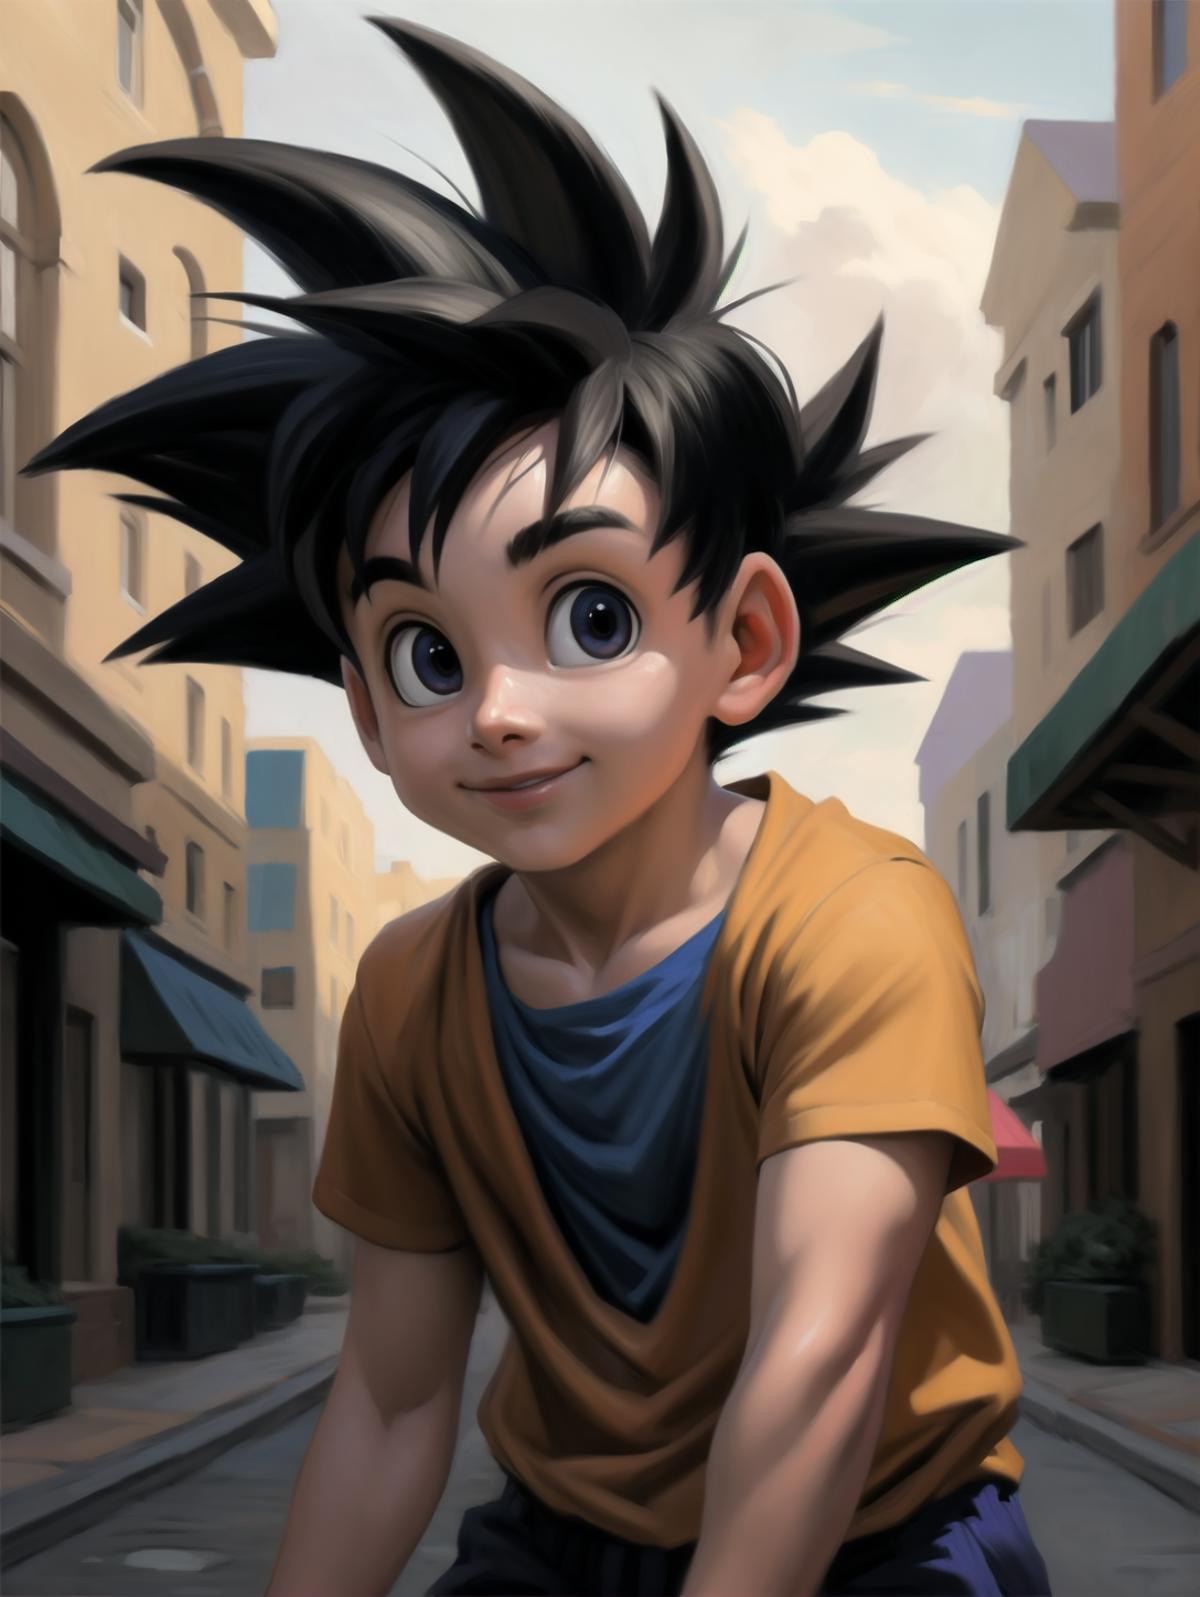 A young boy with spiky hair and a blue shirt is smiling in a cartoon drawing.